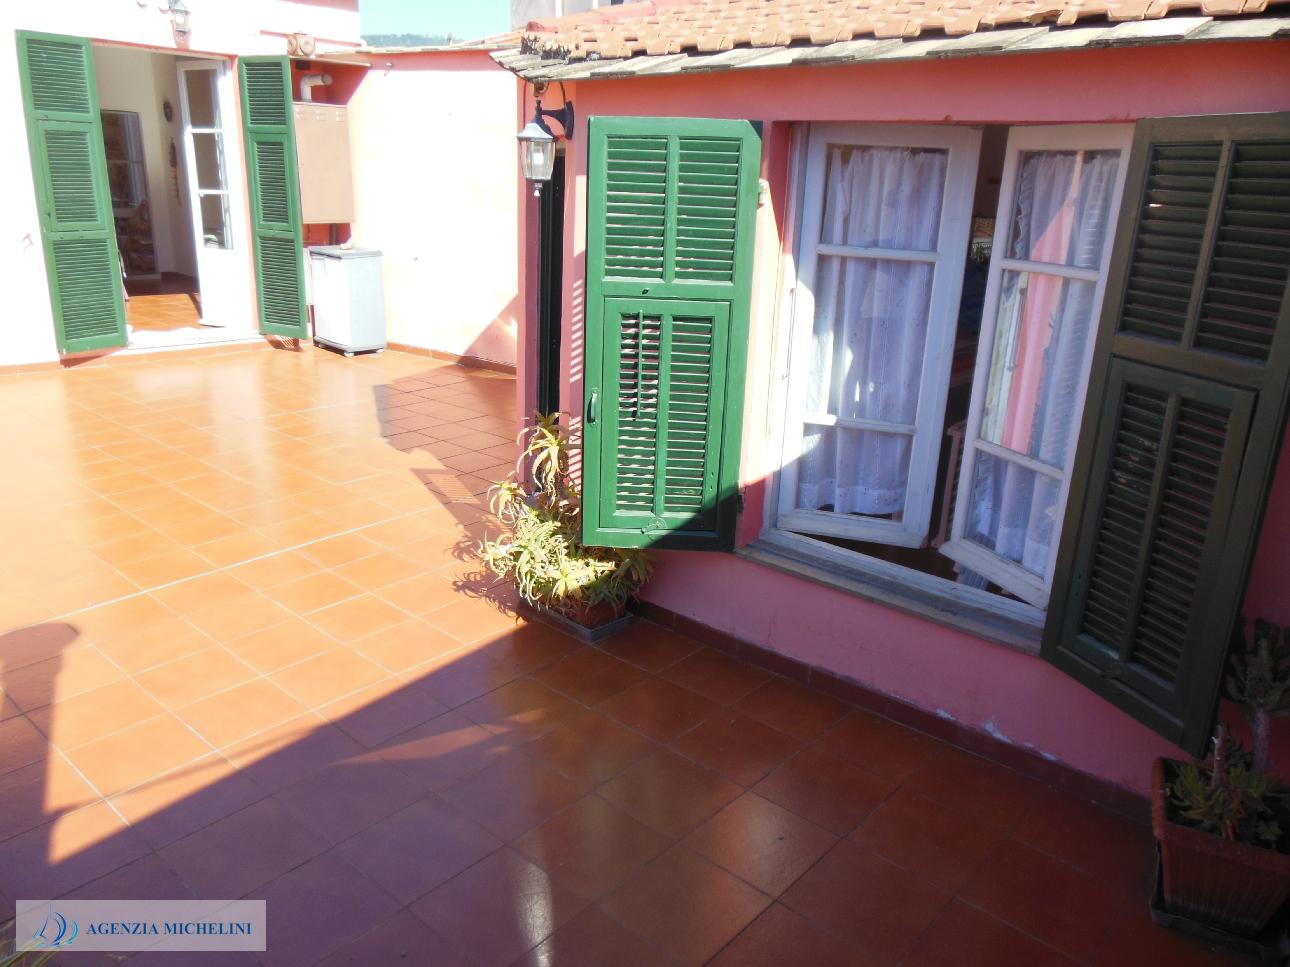 Ref. 012 - Renovated country house with beautiful living terrace in the historic centre of Levante.